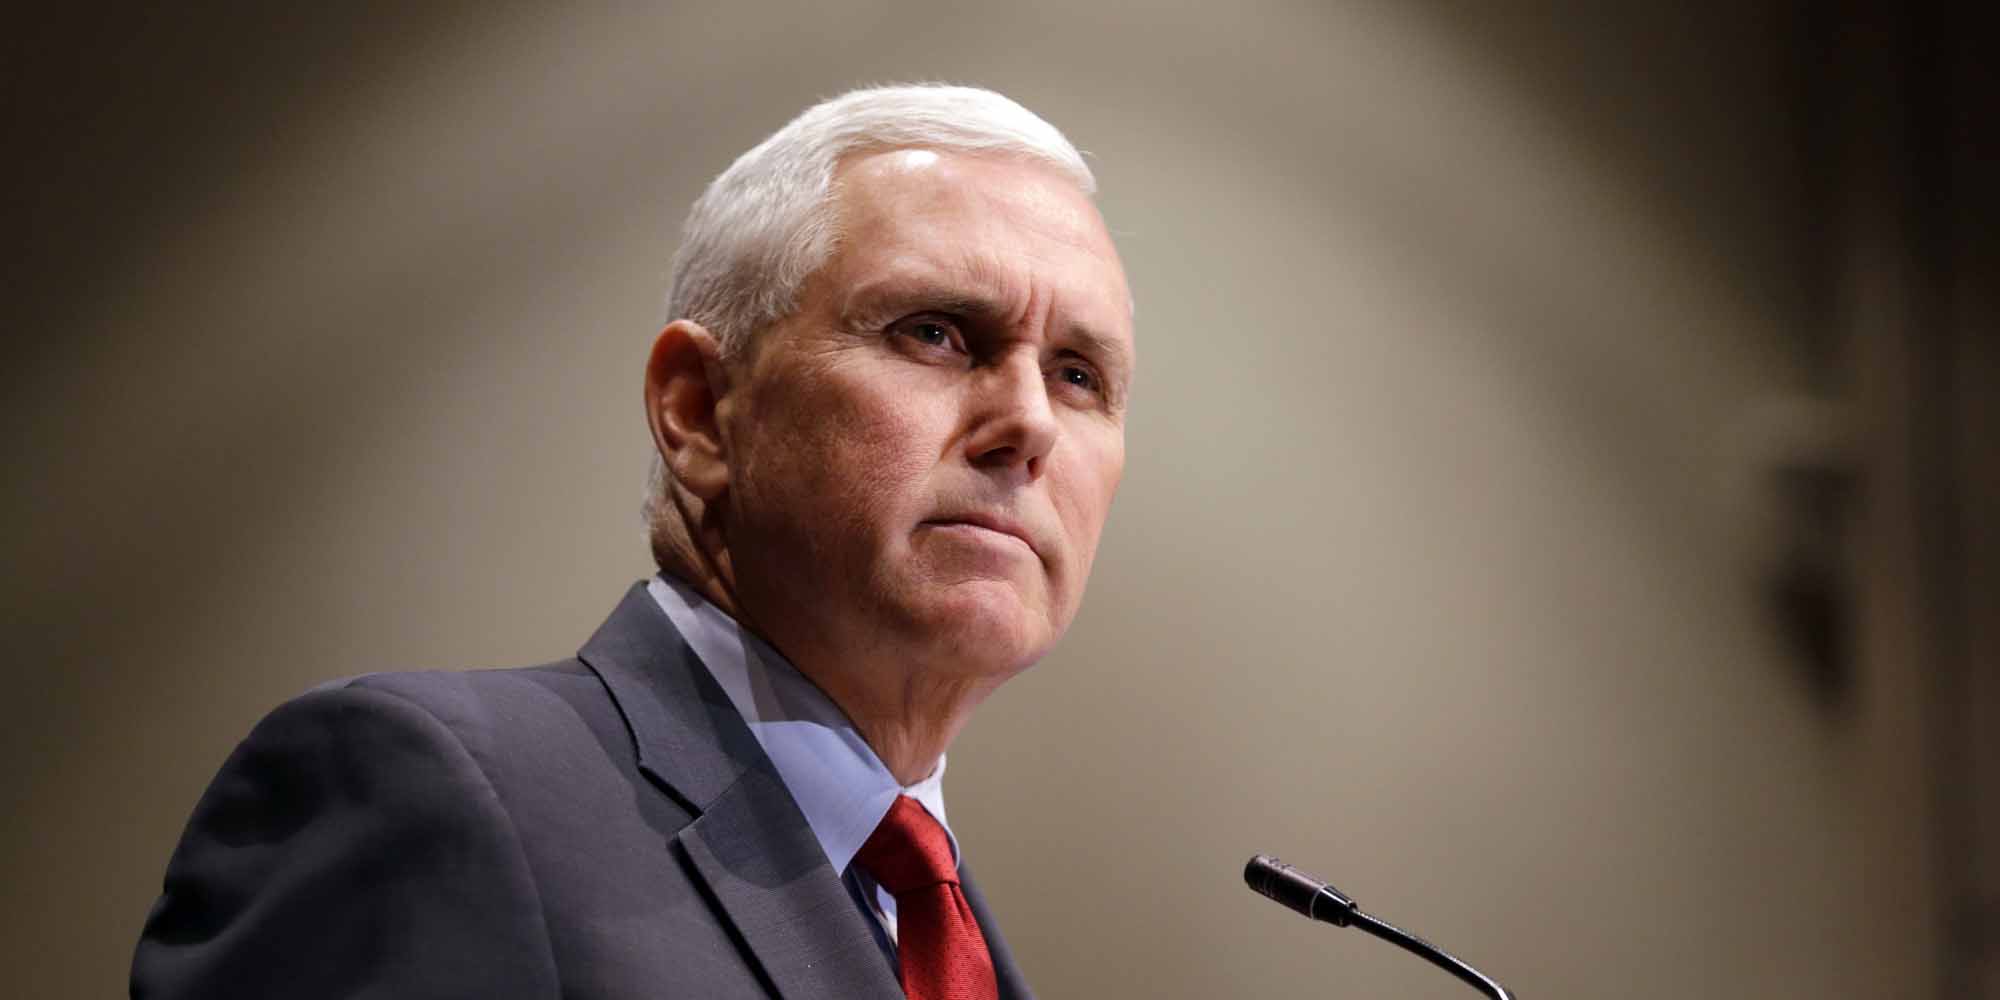 Indiana Gov. Mike Pence announces that the Centers for Medicaid and Medicare Services had approved the state's waiver request for the plan his administration calls HIP 2.0 during a speech in Indianapolis, Tuesday, Jan. 27, 2015. (AP Photo/Michael Conroy)